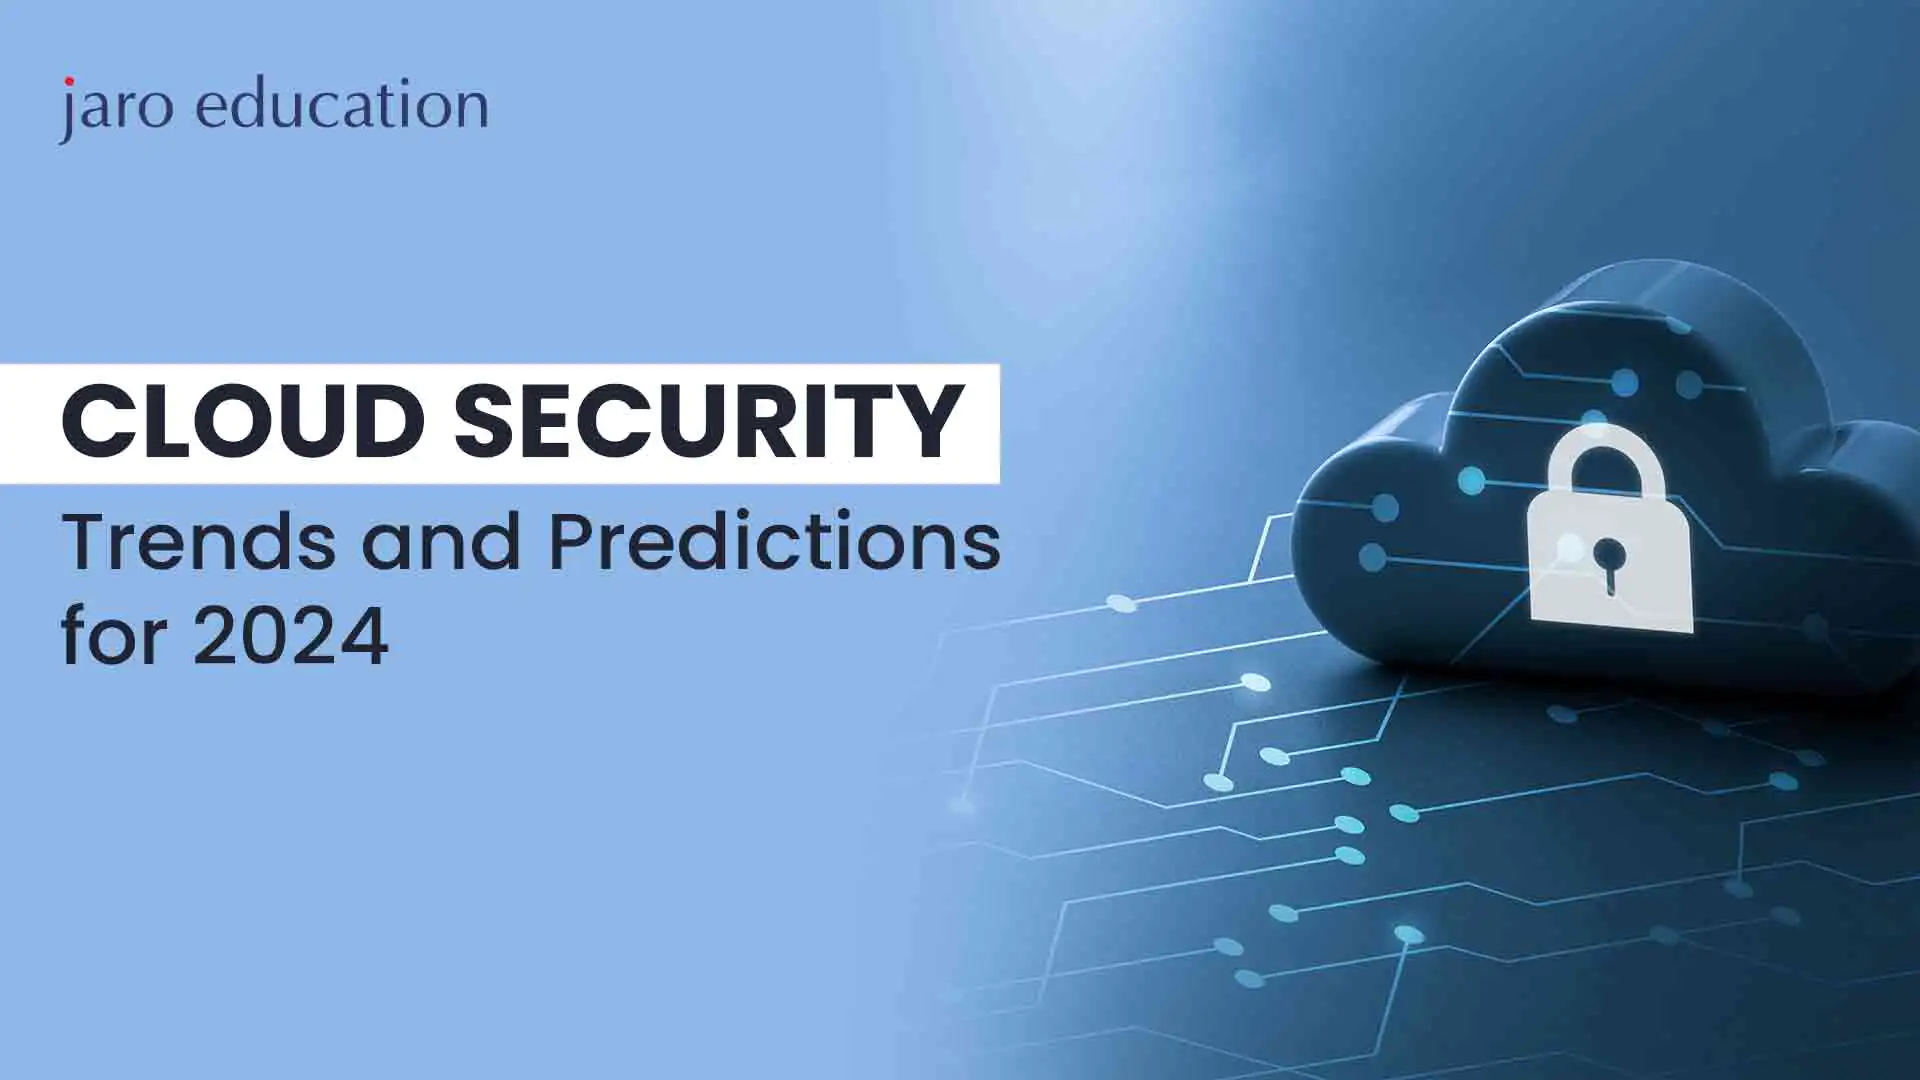 Cloud Security Trends and Predictions for 2024